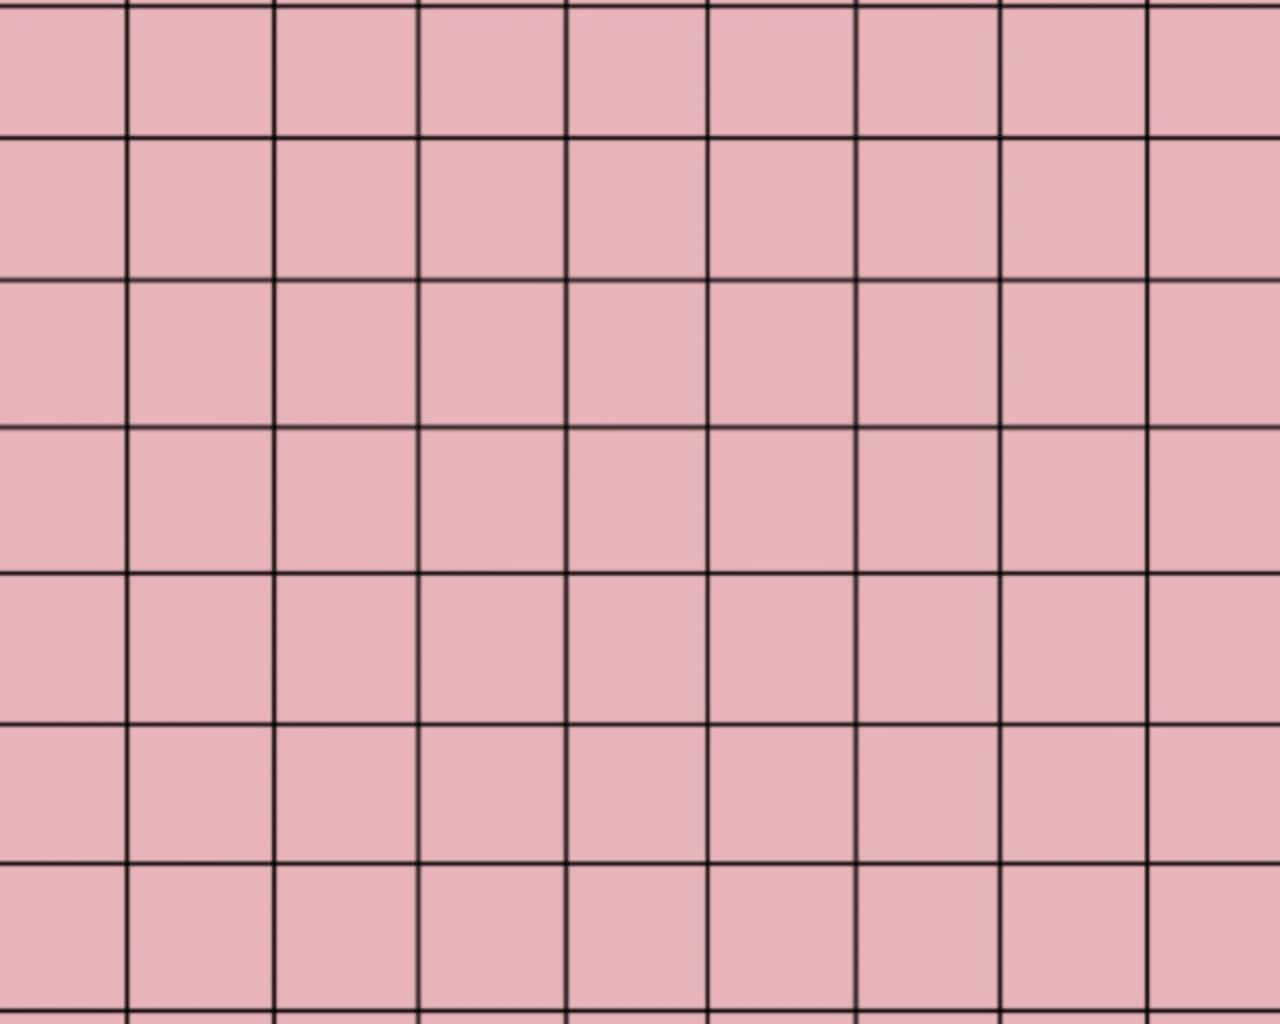 A Pink Grid With Black Lines